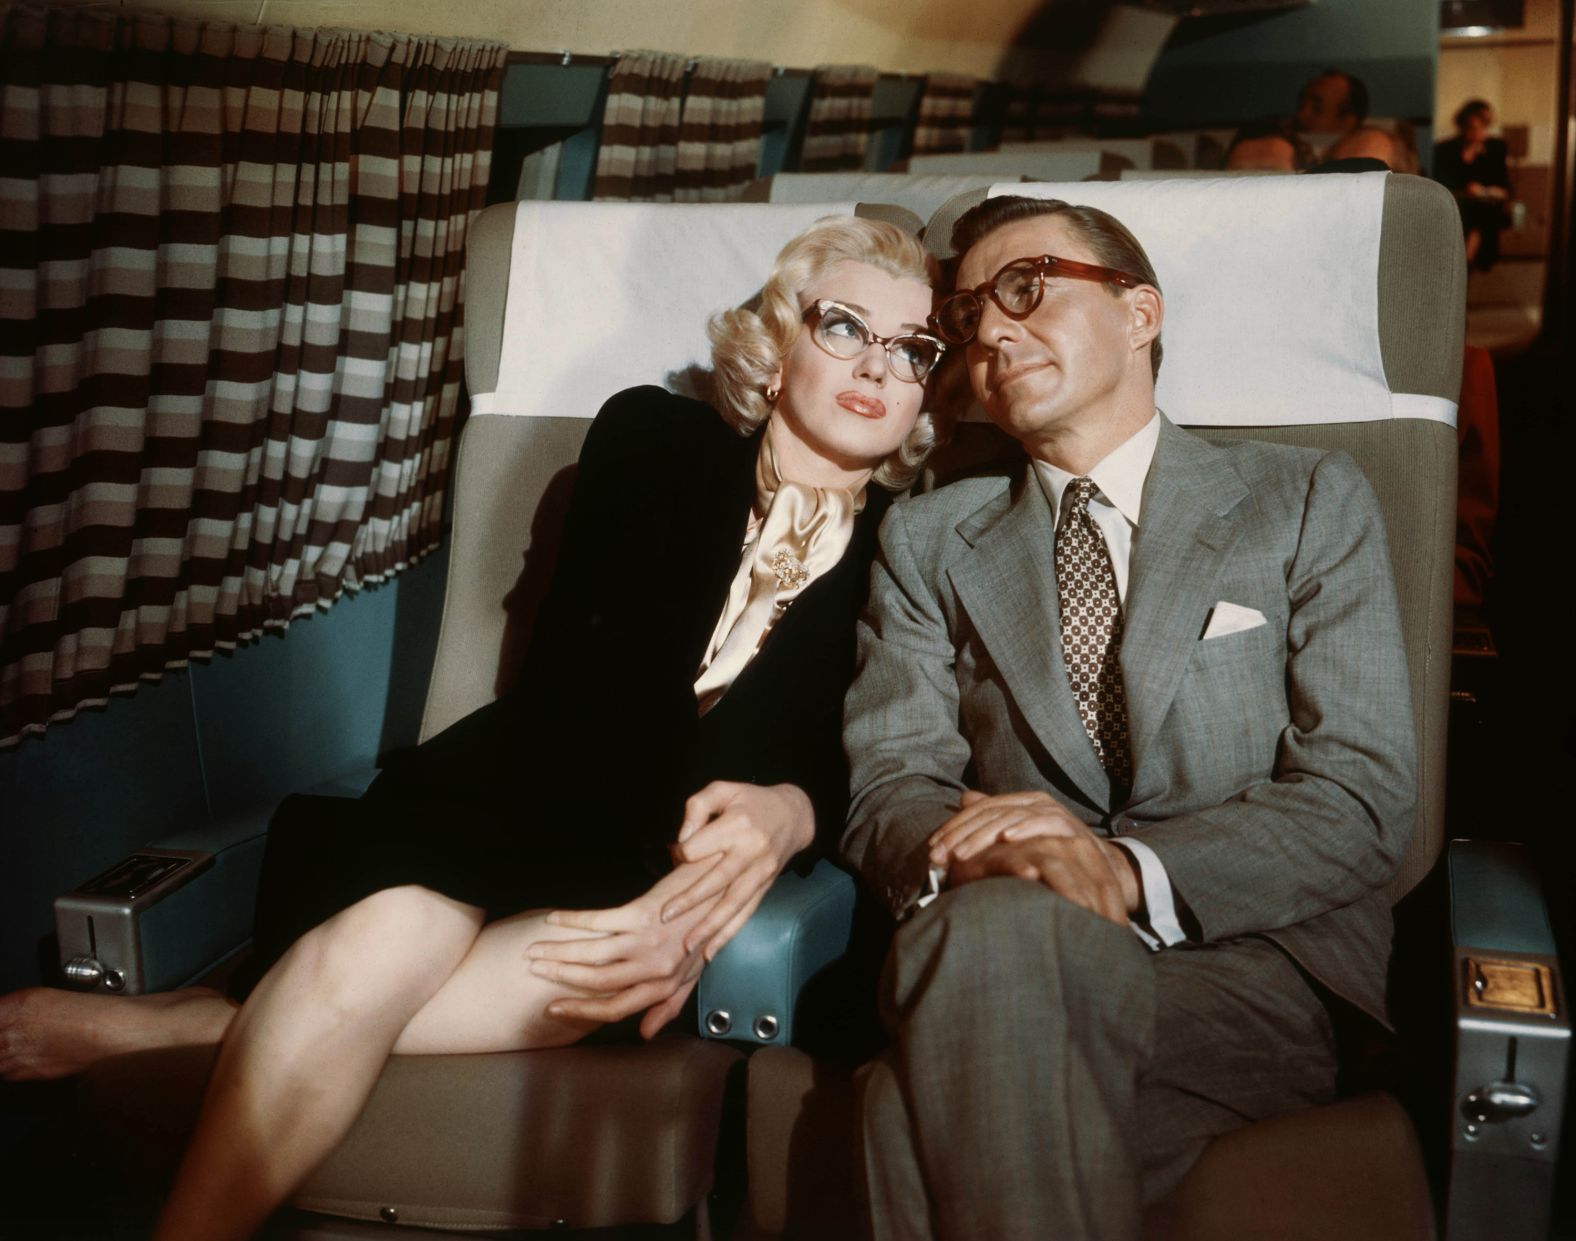 In "How To Marry A Millionaire," Monroe starred alongside David Wayne. The movie was Marilyn's third hit of 1953, earning Fox a total of $15 million, the equivalent of $150 million today. "There are not many Hollywood actresses of that era that combined clear physical attractiveness and physical comedy of a slapstick style like she does in 'How to Marry a Millionaire,' where she's a bit blind and keeps running into walls," said film critic Christina Newland.